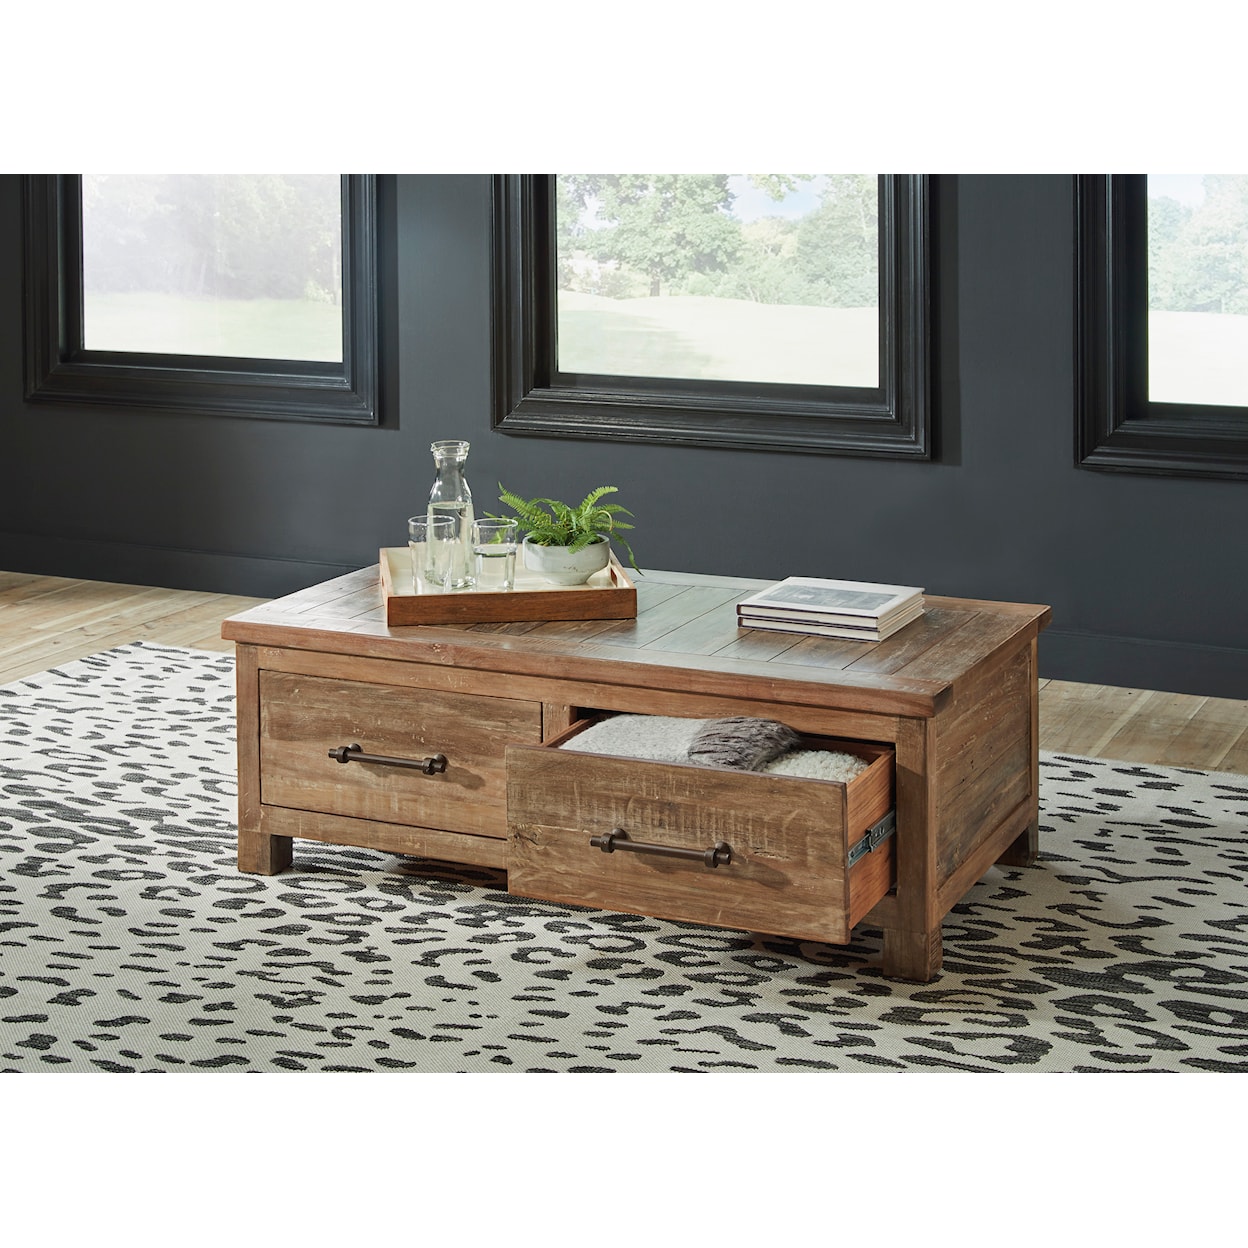 Signature Design by Ashley Furniture Randale Coffee Table